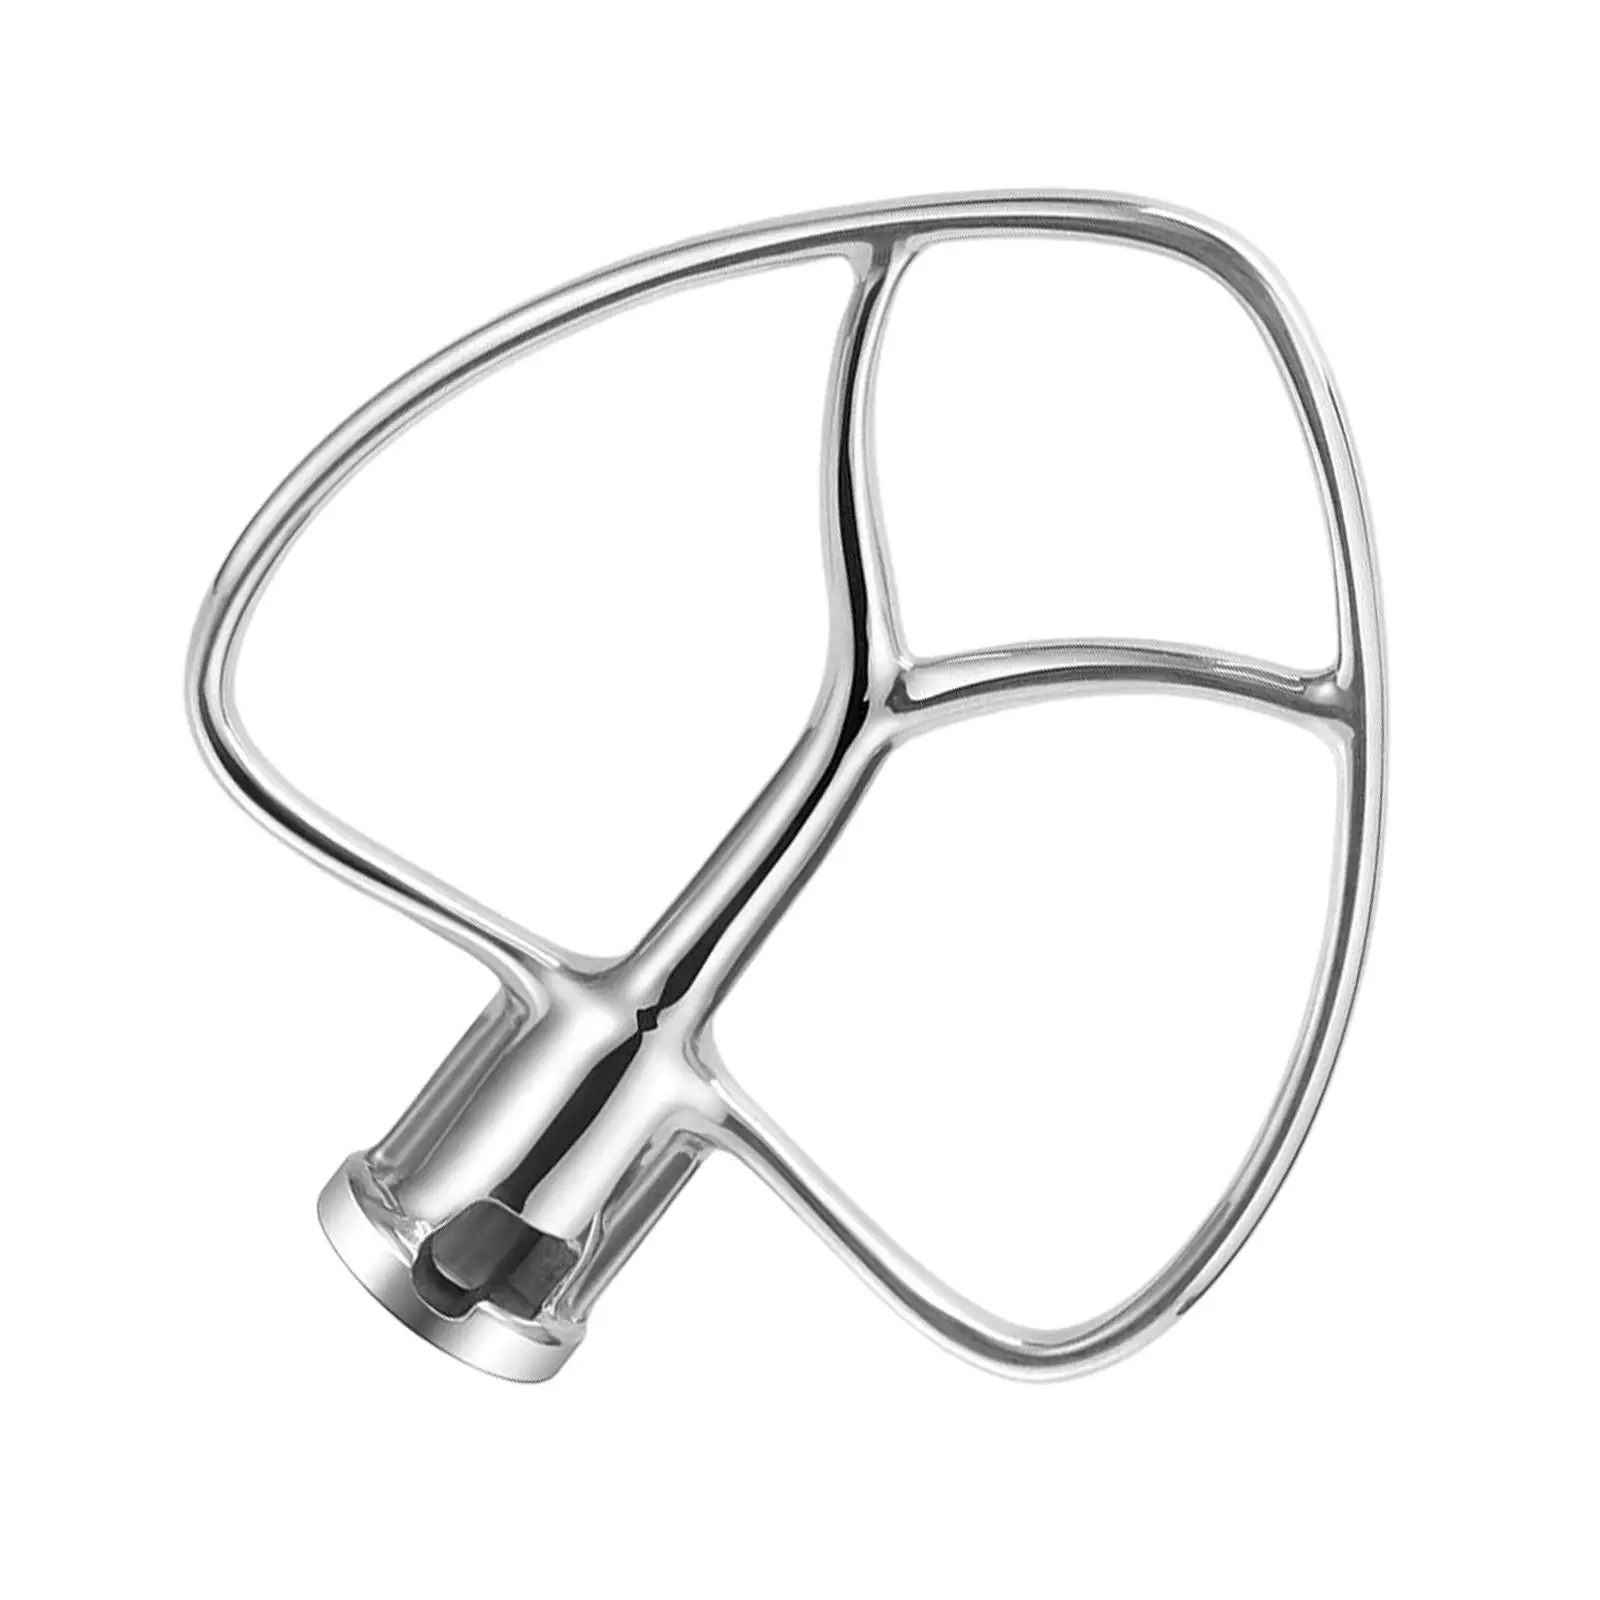 Stand Mixer Attachments Stainless Steel Stir Type paste Hook Mixer Accessory for 5Qt Kitchen Sausage Pastry Pasta